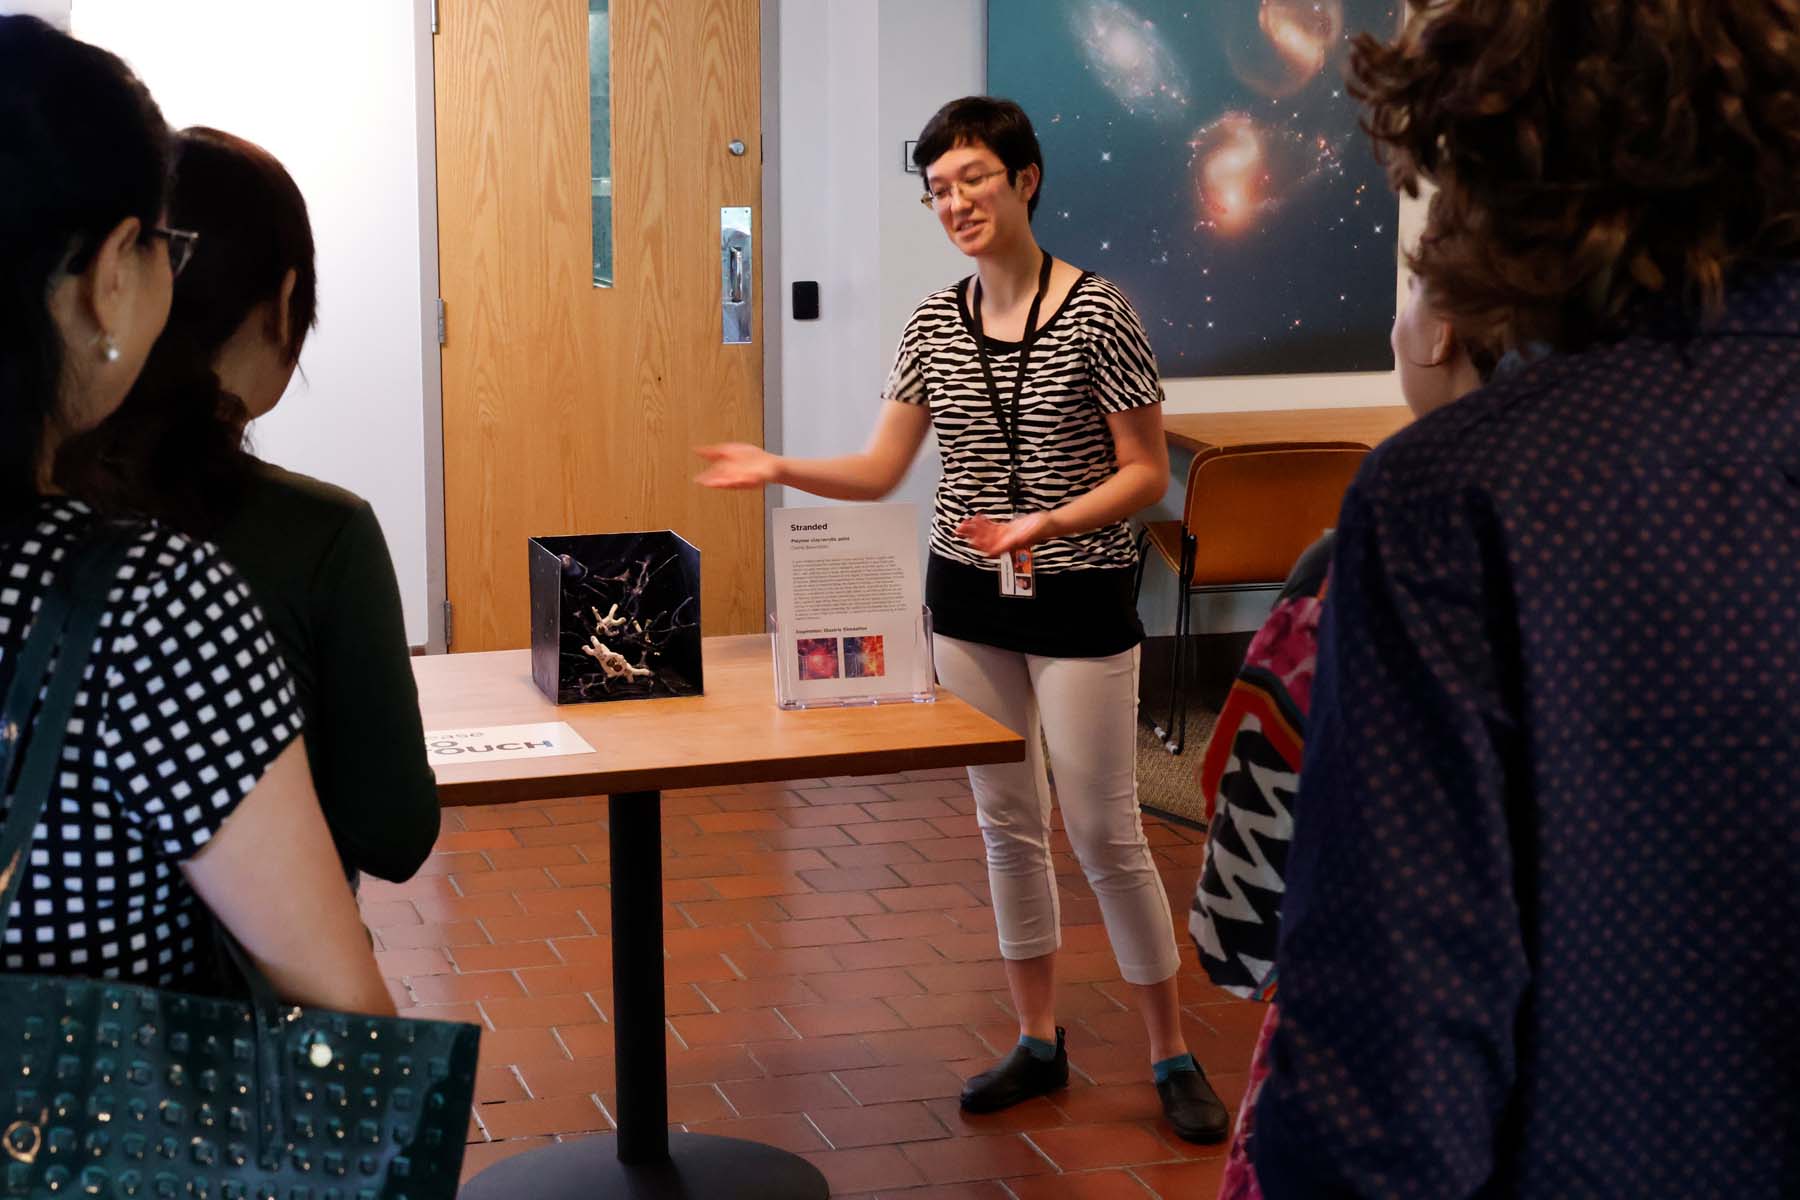 We view from behind a crowd of onlookers as a student motions towards her sculpture as she describes the piece. The sculpture is inside a box and includes a space web with astronauts caught, and a giant spider.